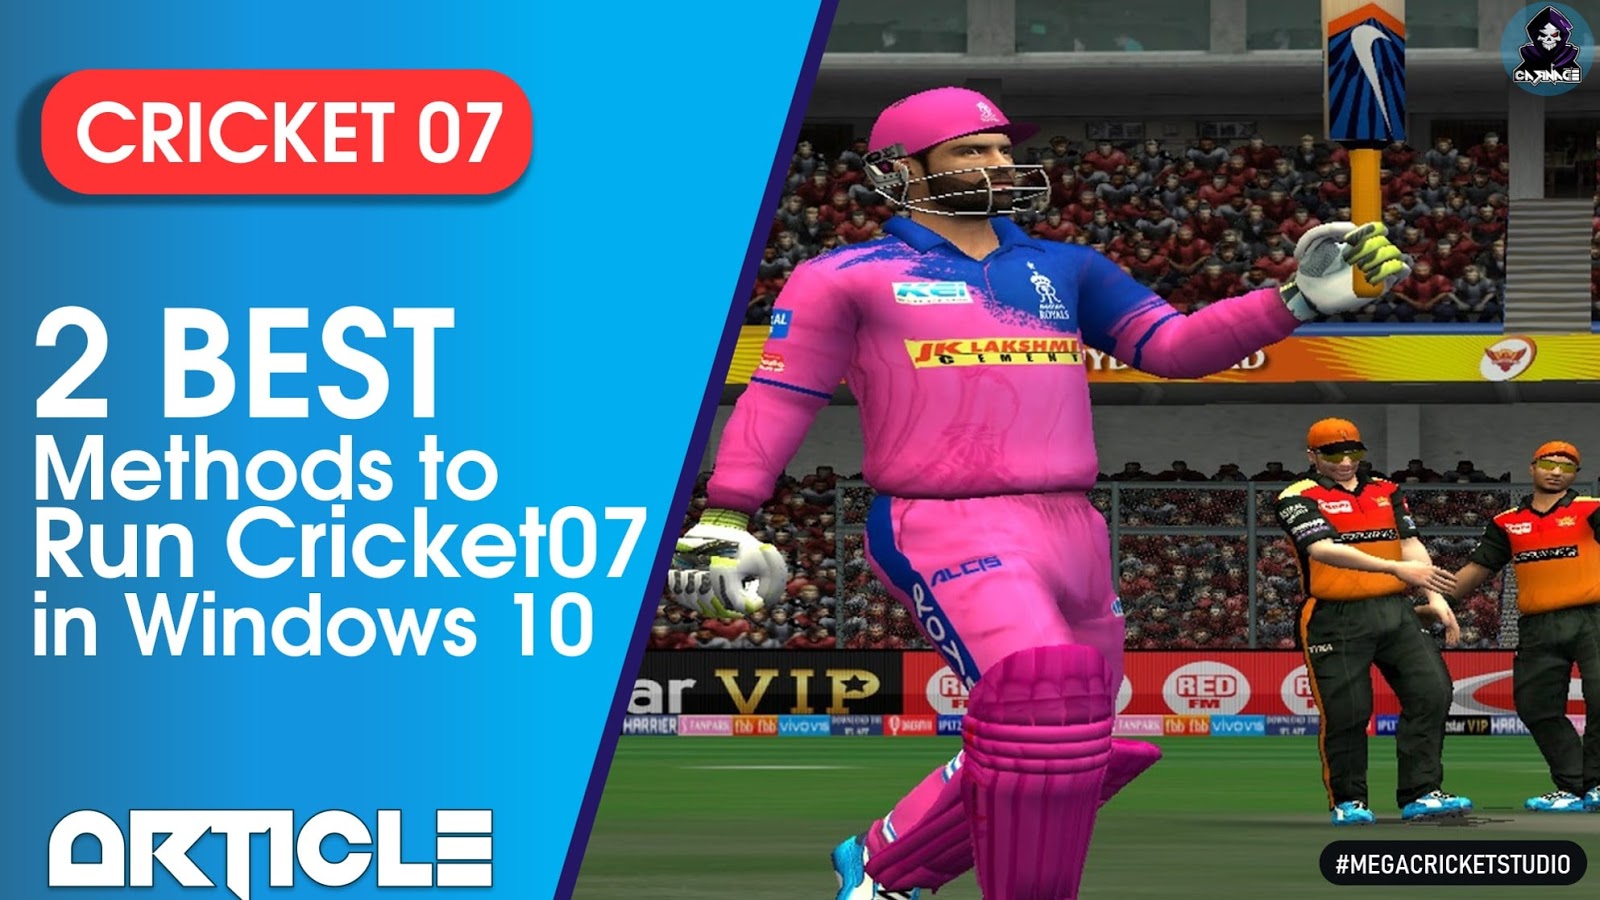 Follow these 2 Methods to make Cricket 07 work in Windows 10!